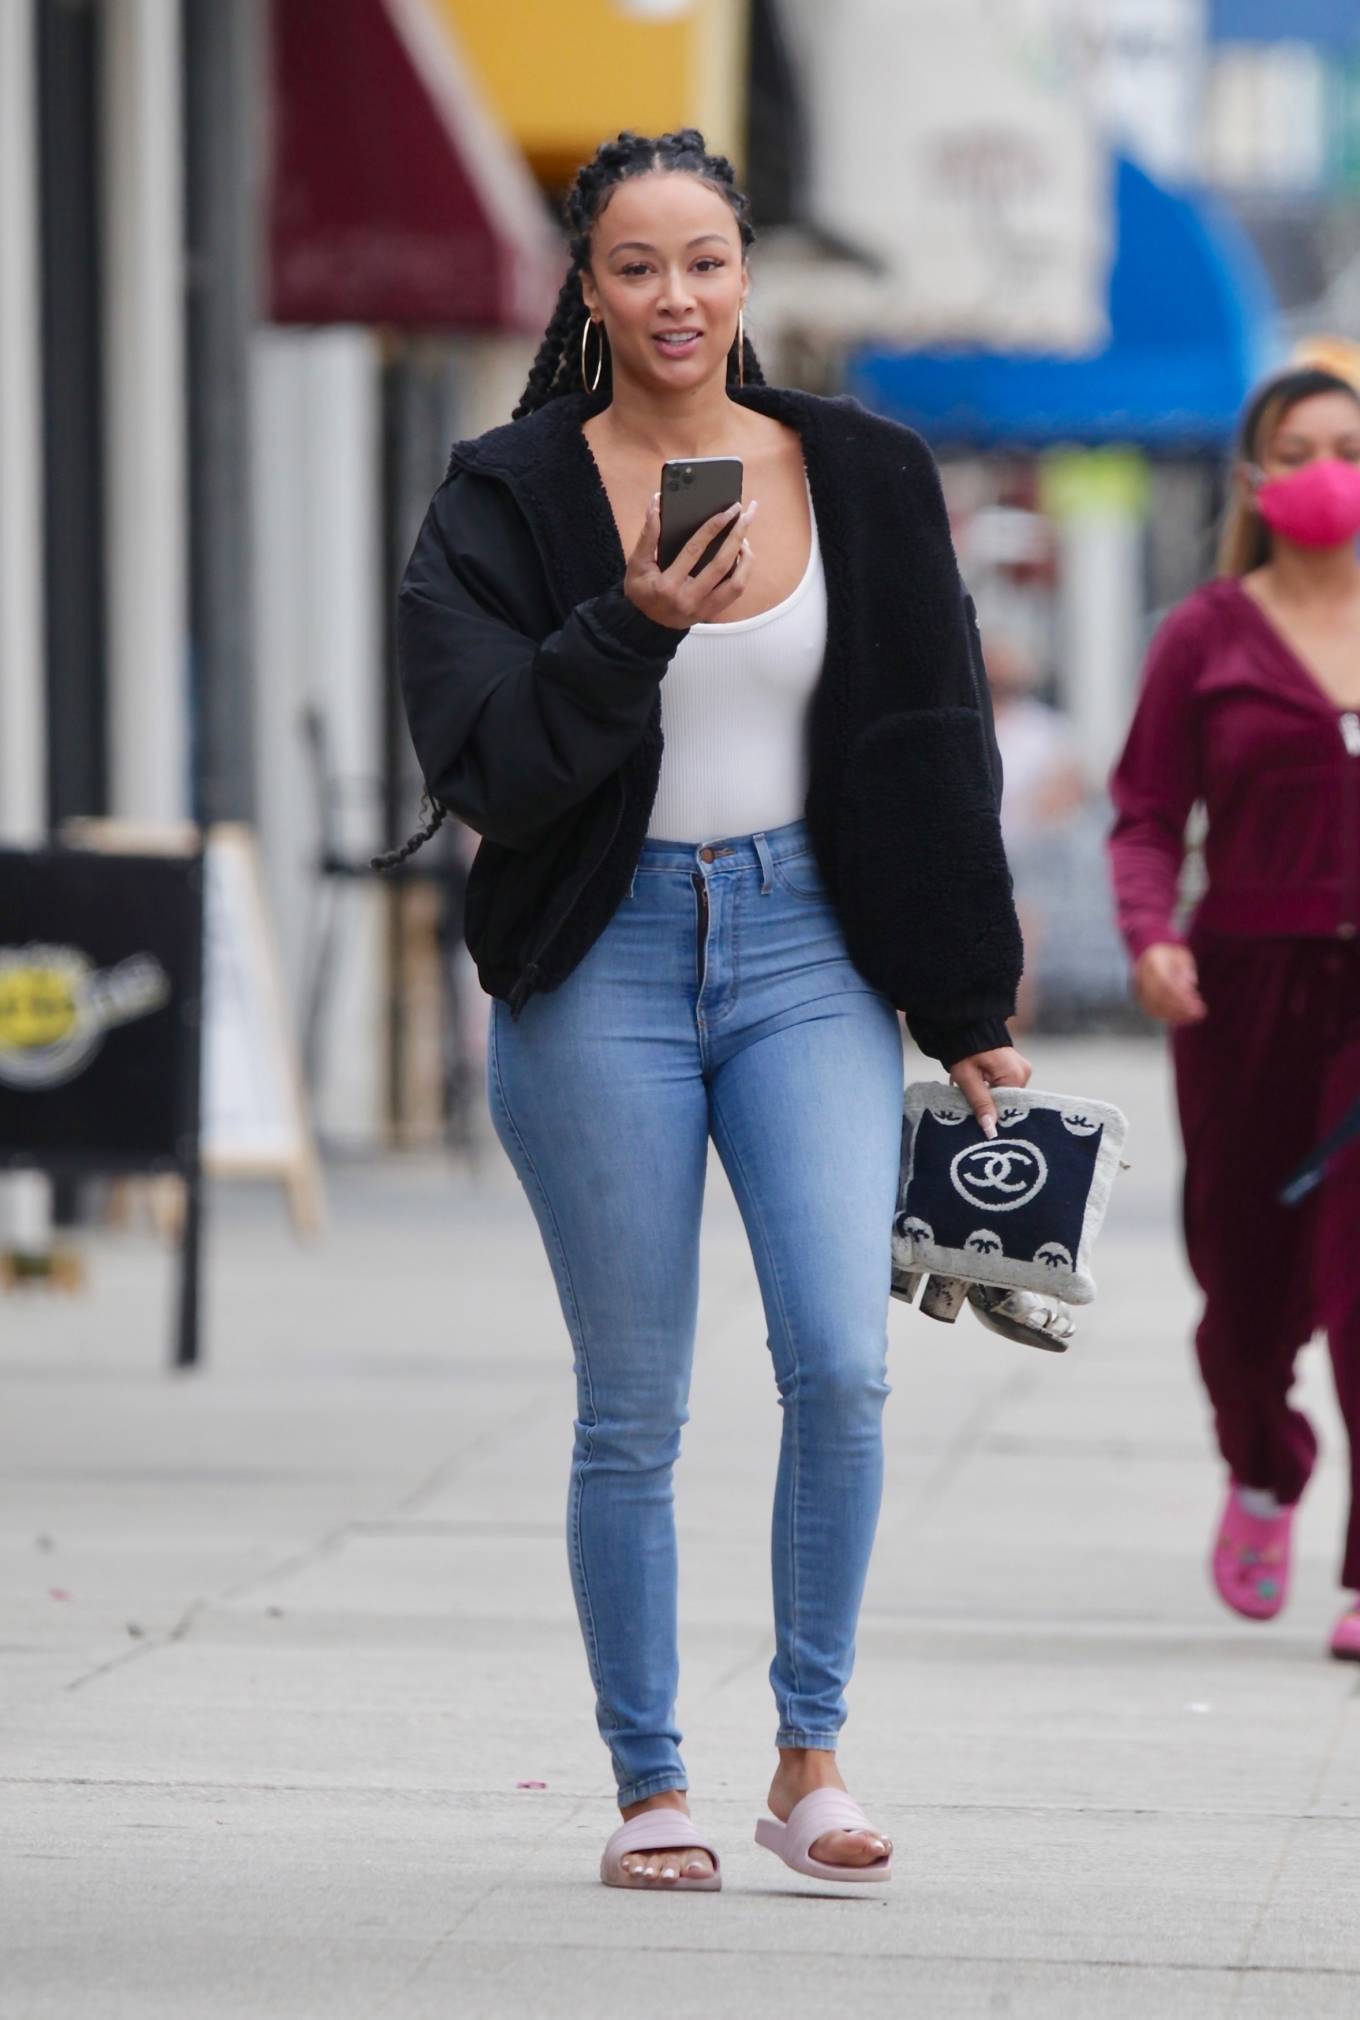 Draya Michele 2021 : Draya Michele – Out for a lunch in Studio City-13